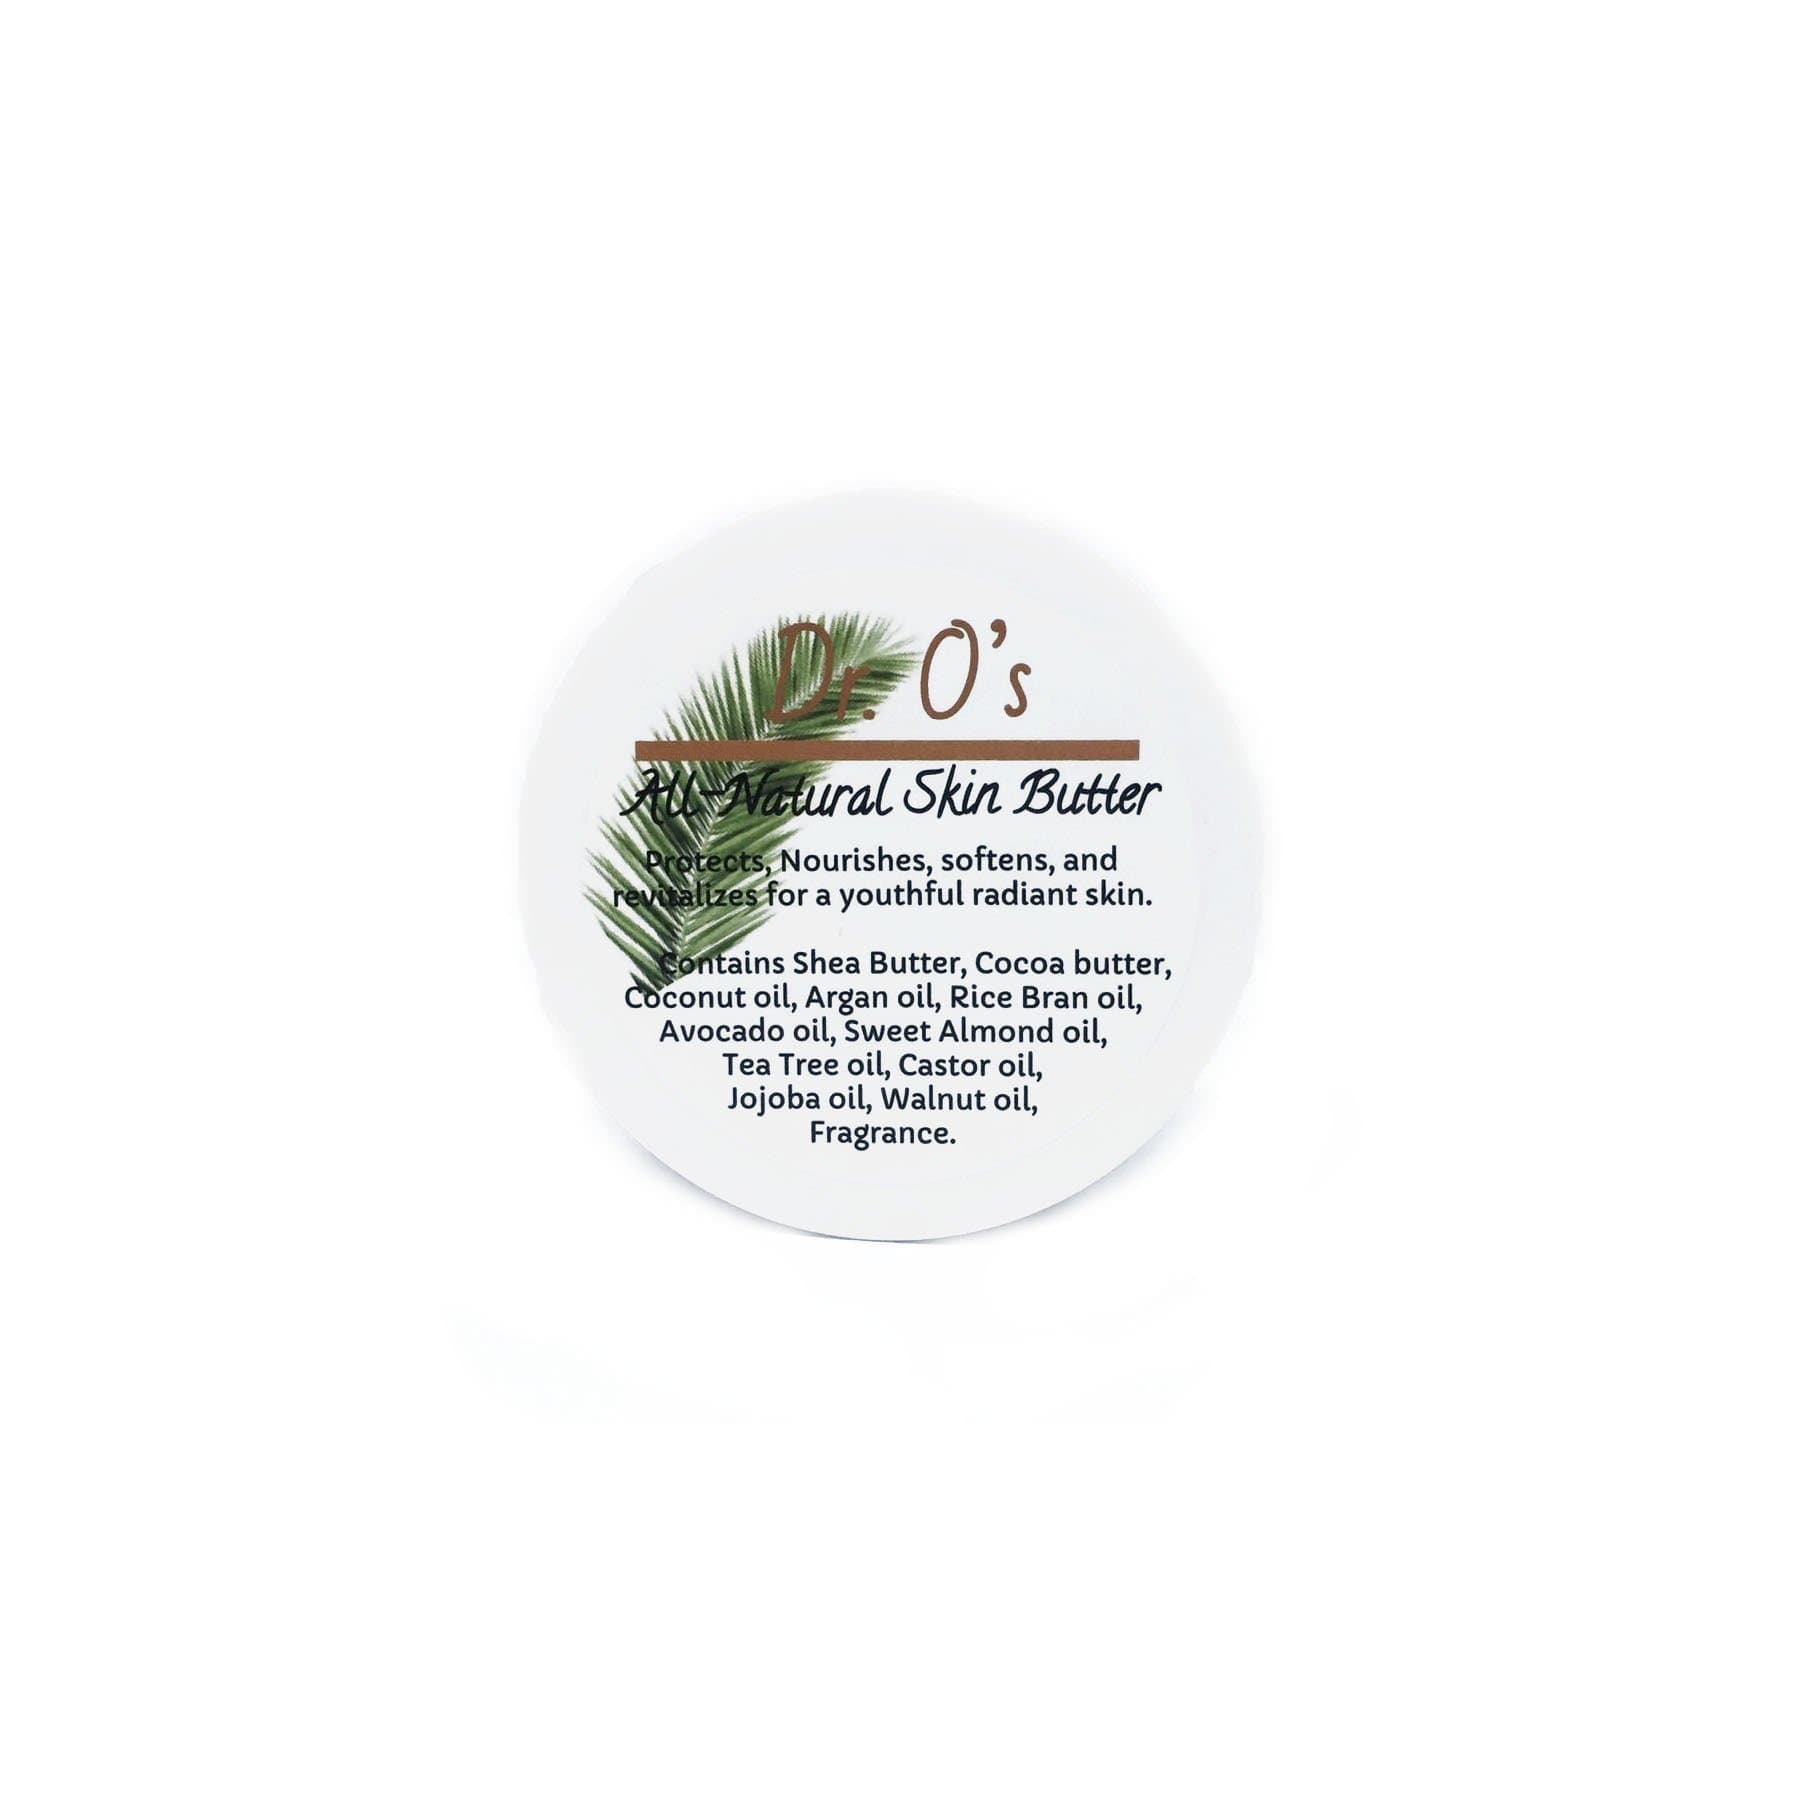 Dr. O’s All-Natural Skin Butter